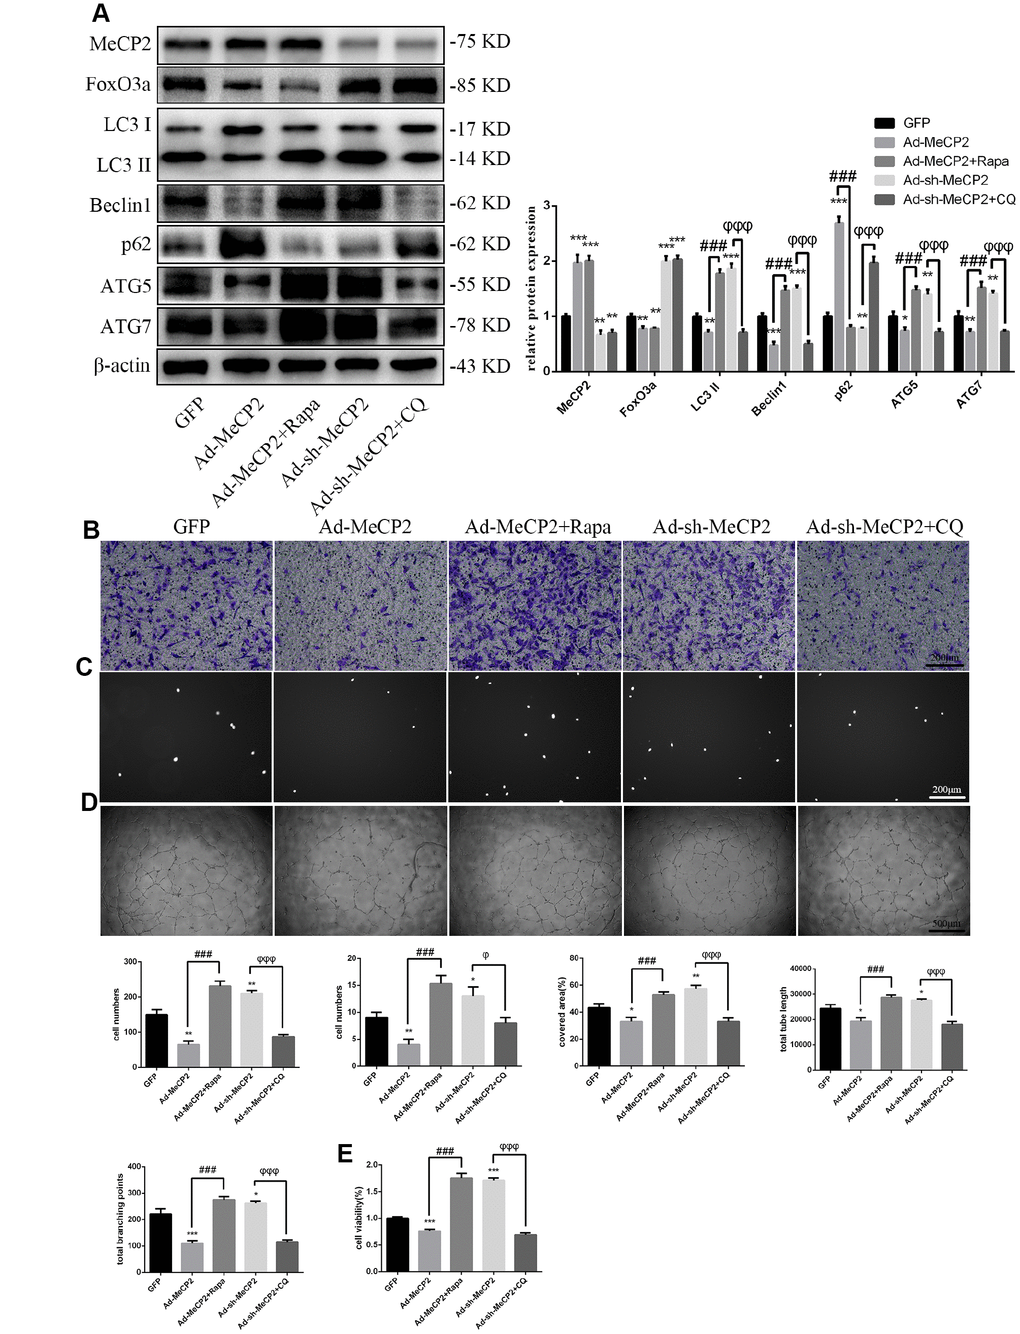 MeCP2 attenuates EPC functionality through autophagy. (A) FoxO3a, LC3 II, Beclin1, p62, ATG5, and ATG7 protein levels were detected by western blotting after GFP, Ad-MeCP2, Ad-MeCP2 + Rapa, Ad-sh-MeCP2, or Ad-sh-MeCP2 + CQ. (B) Cell migration was evaluated by Transwell migration assays after treatment for 48 h. (C) Cell adhesion ability was evaluated by matrix adhesion assays after treatment for 48 h. (D) Angiogenic ability was evaluated by Matrigel assays after treatment for 48 h. (E) Cell viability was evaluated with CCK-8 after treatment for 48 h. *P #P ##P ###P φP φφP φφφP 